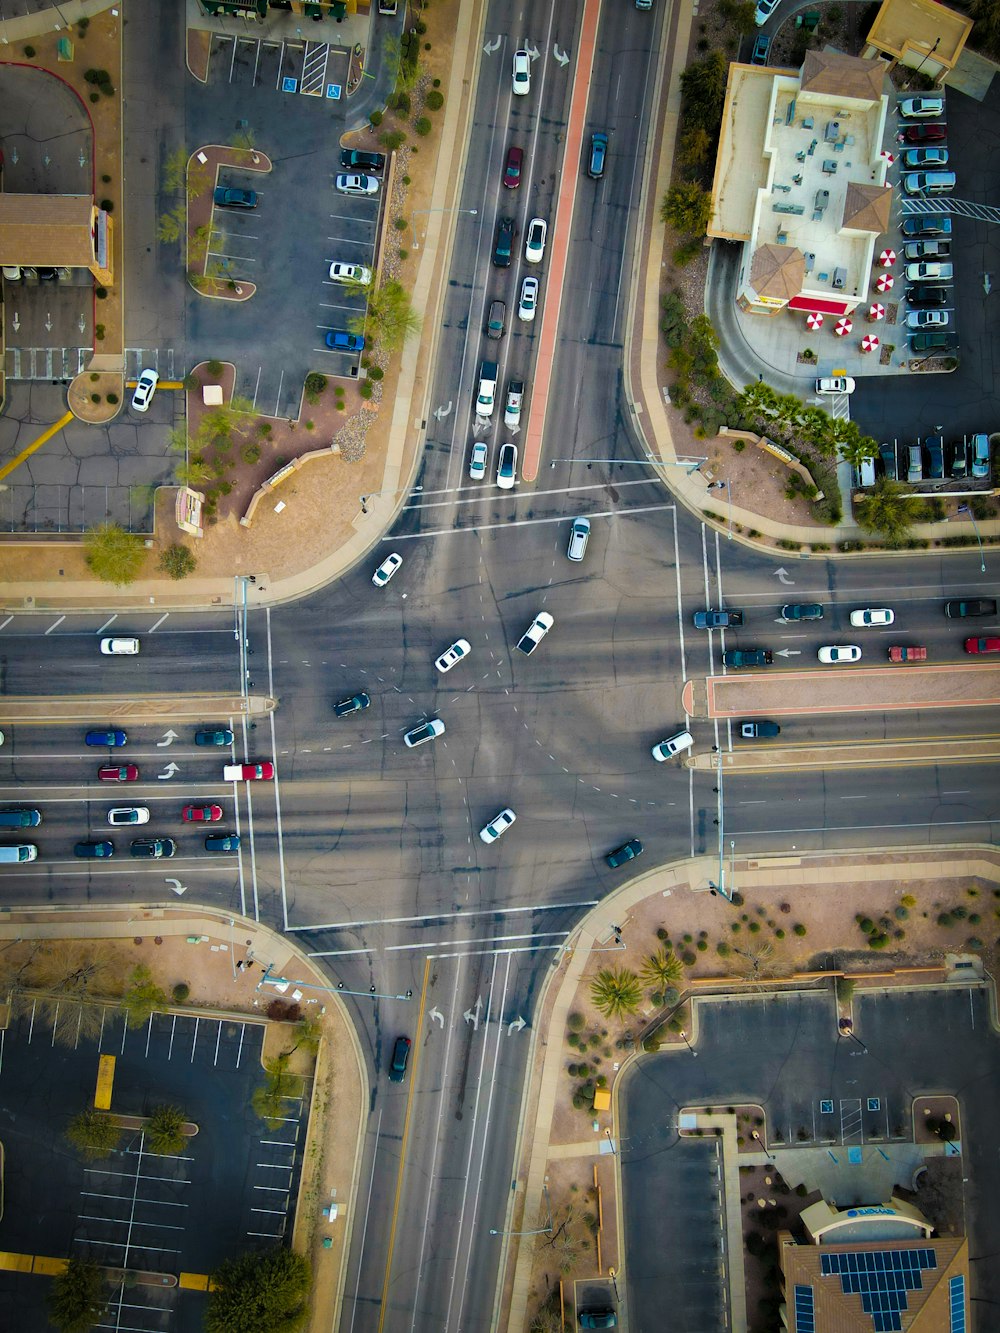 an aerial view of a street intersection with cars